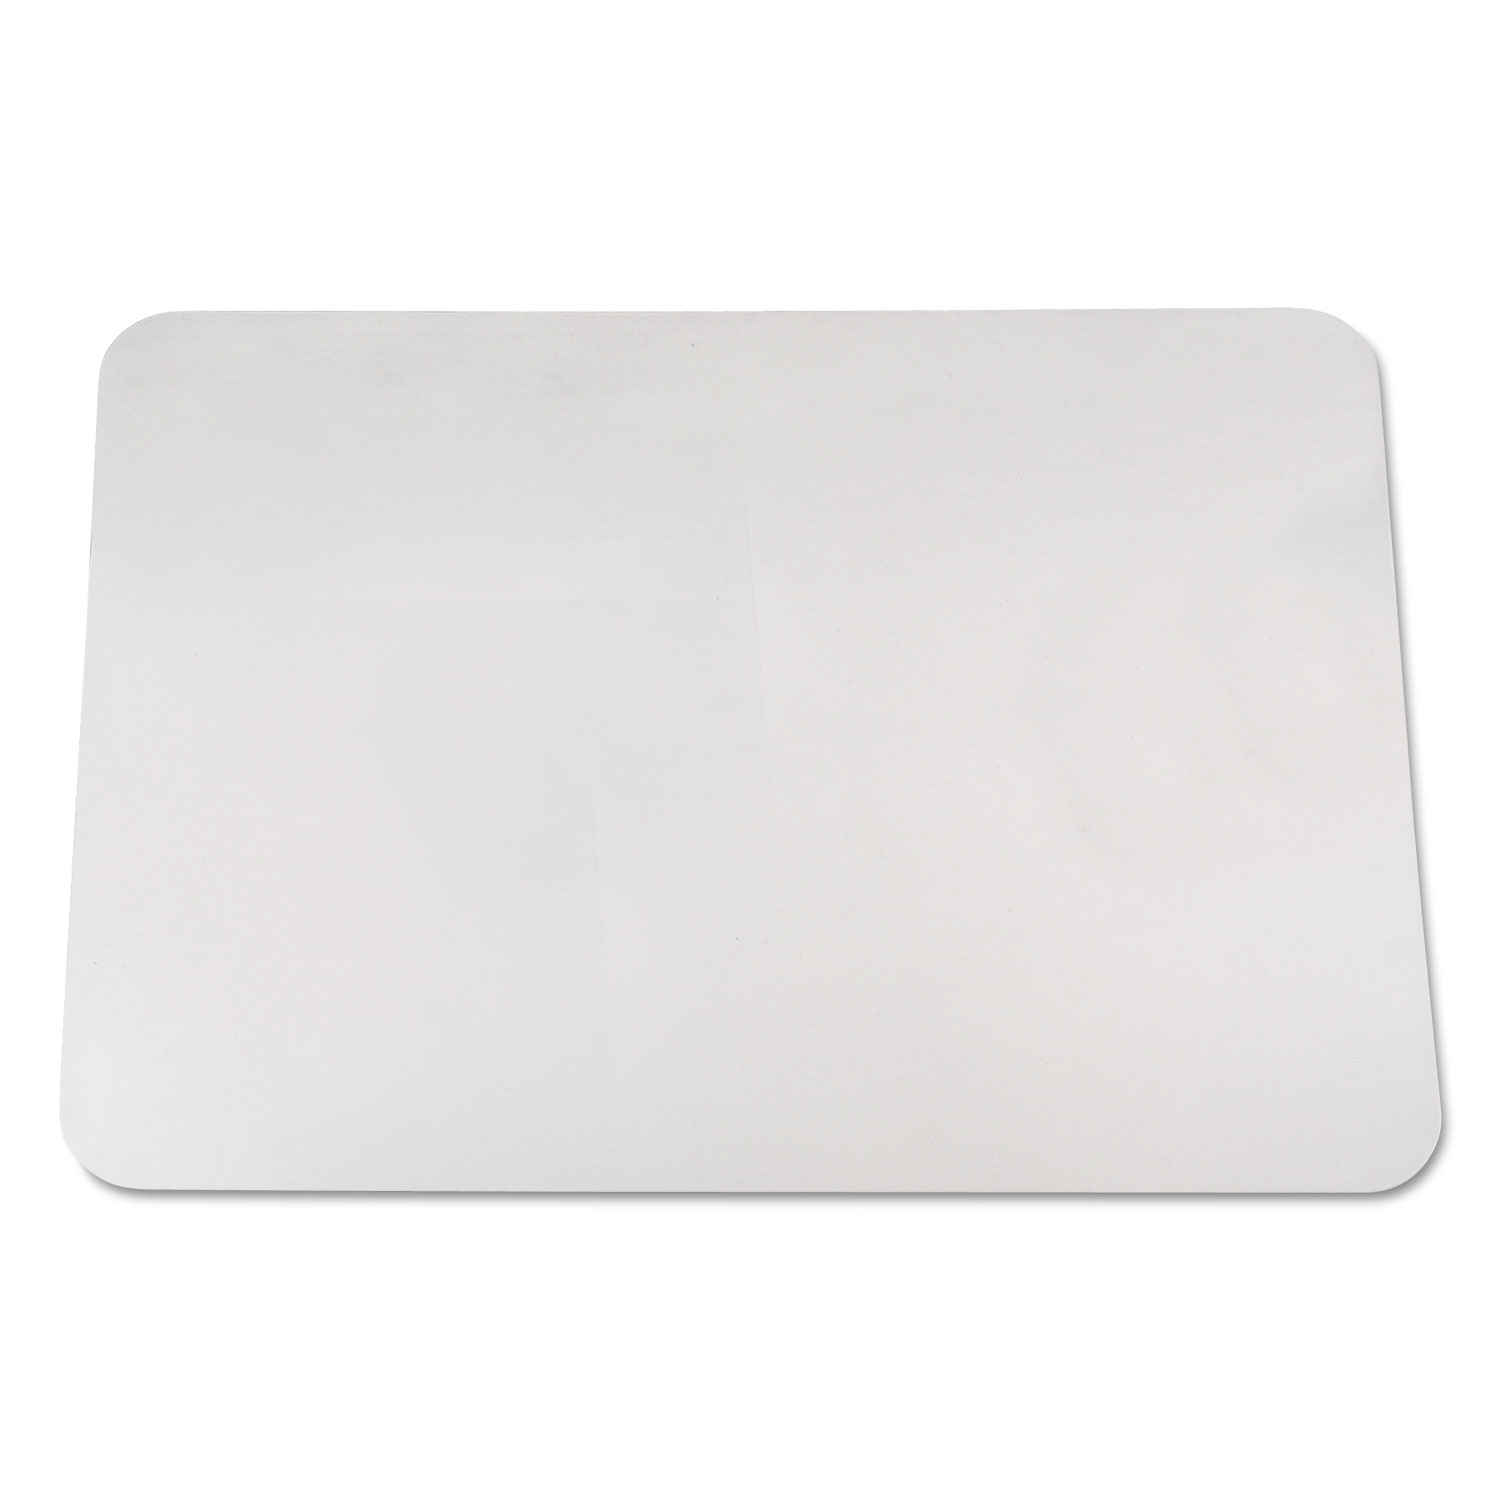 KrystalView Desk Pad with Microban, 24 x 19, Clear